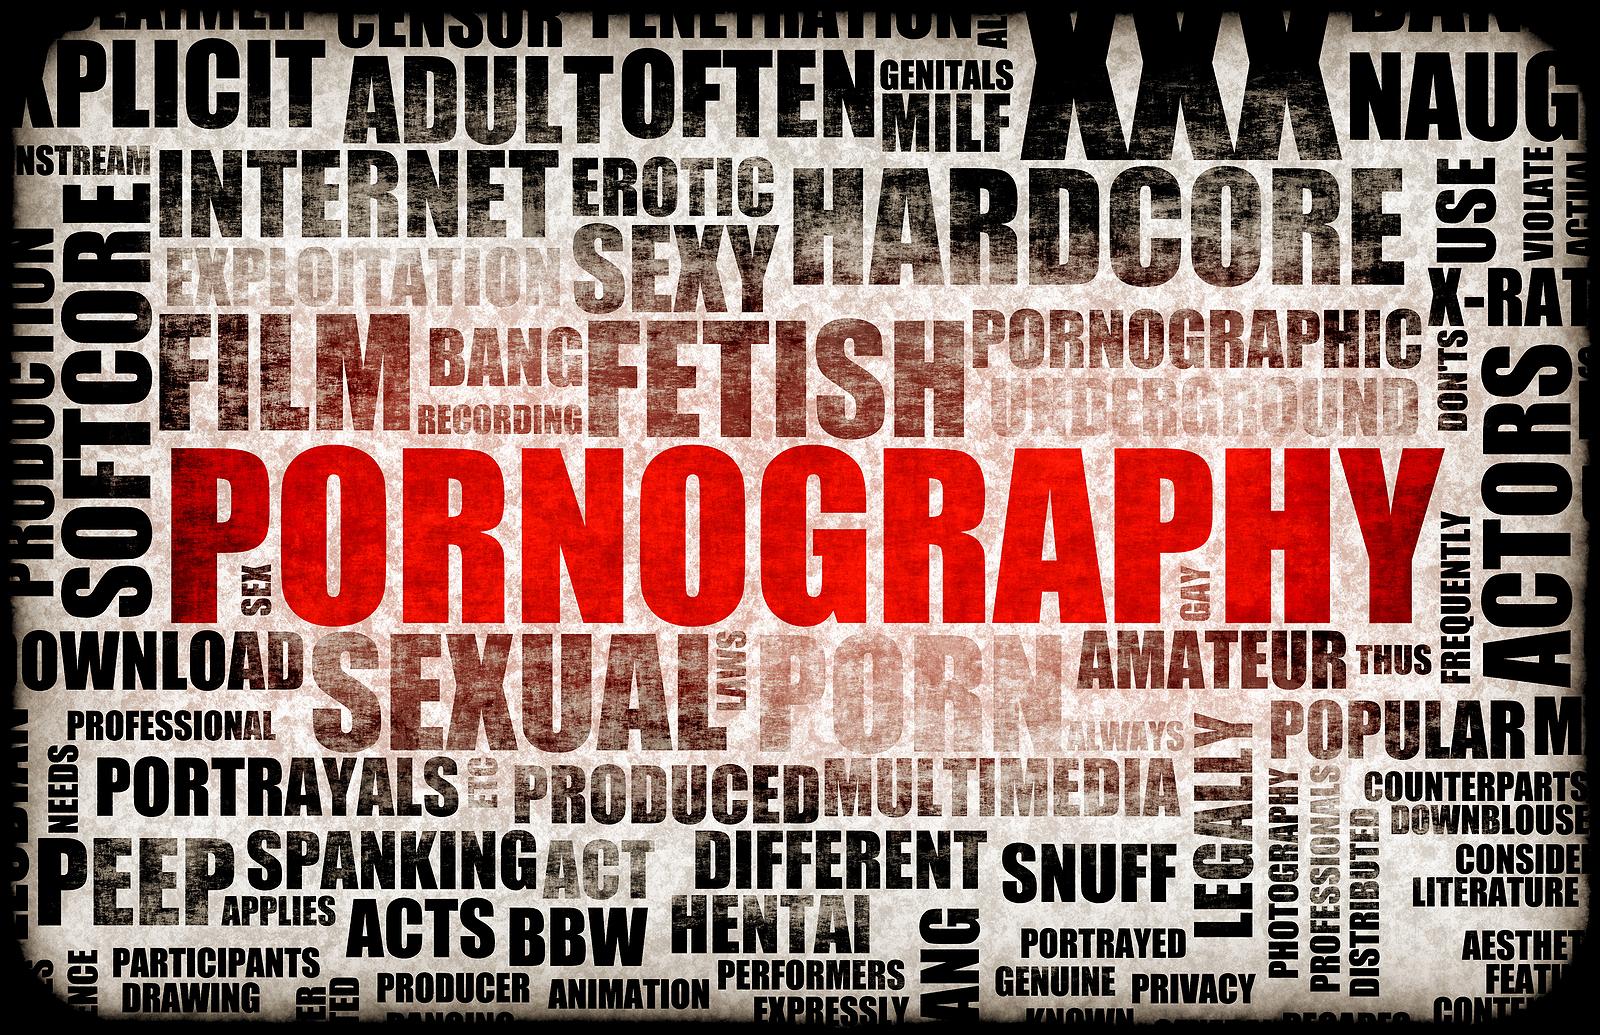 History of Pornography - How We Got Here?